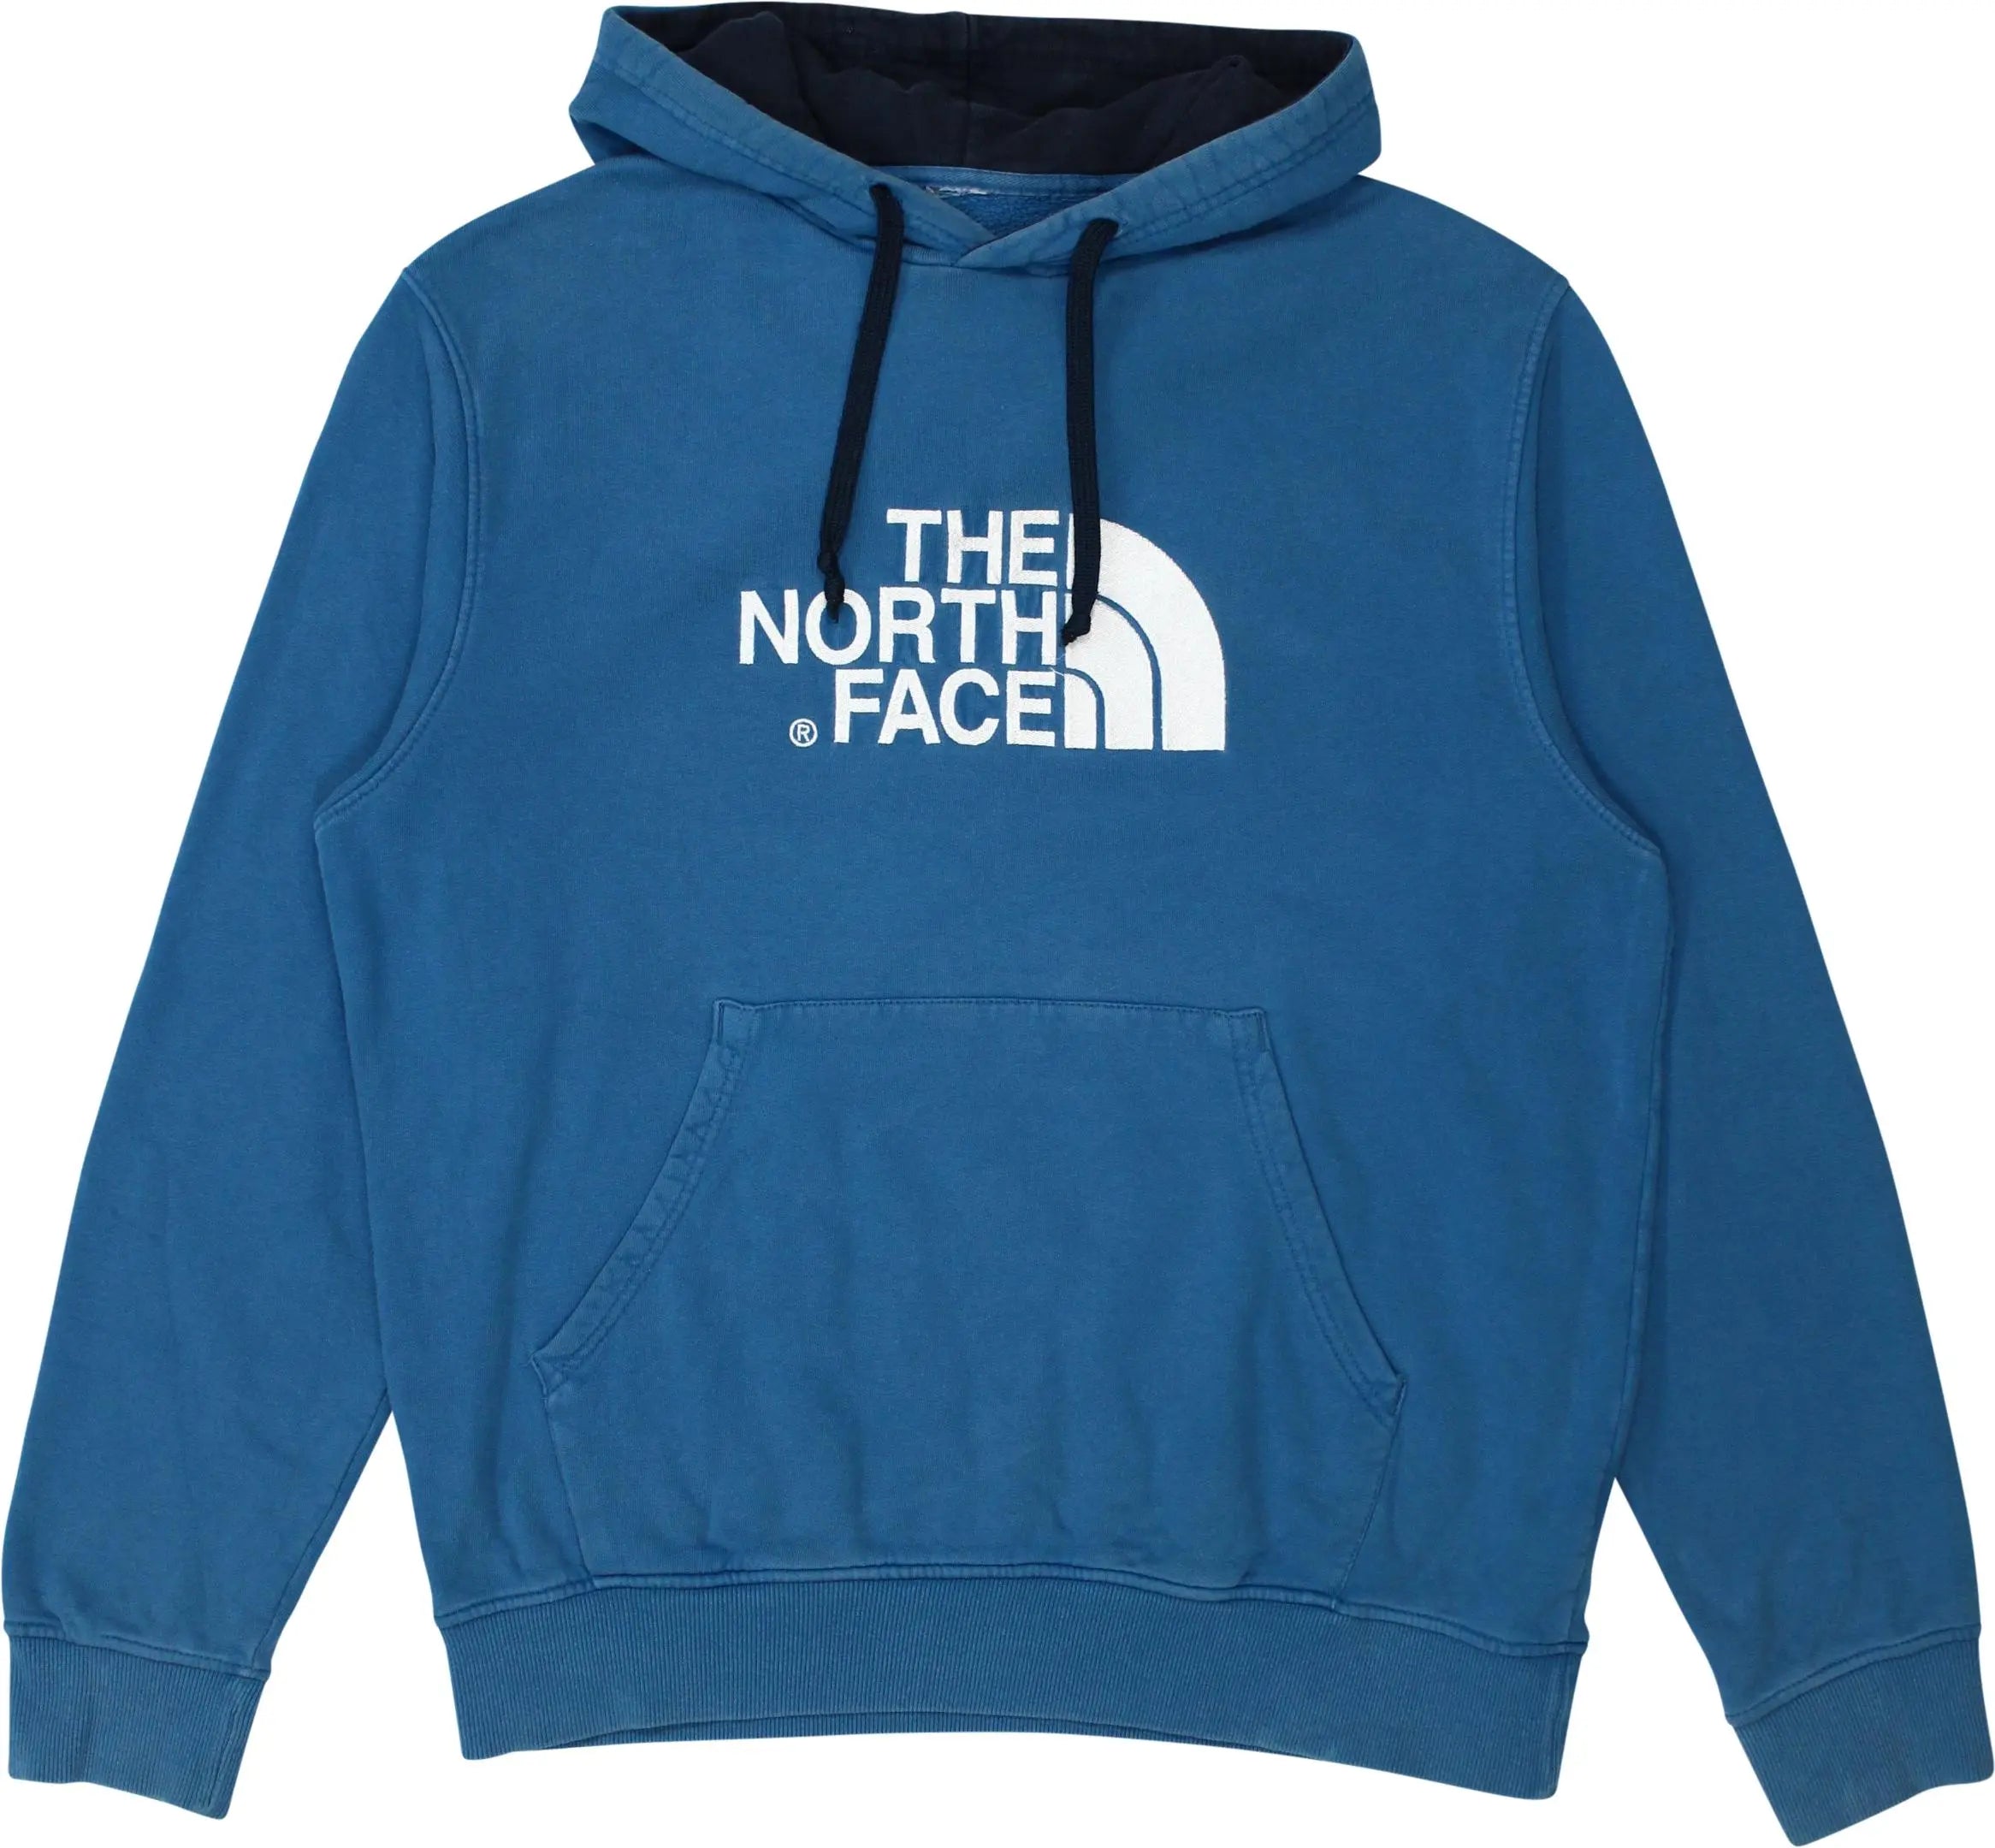 The North Face - The North Face Hoodie- ThriftTale.com - Vintage and second handclothing